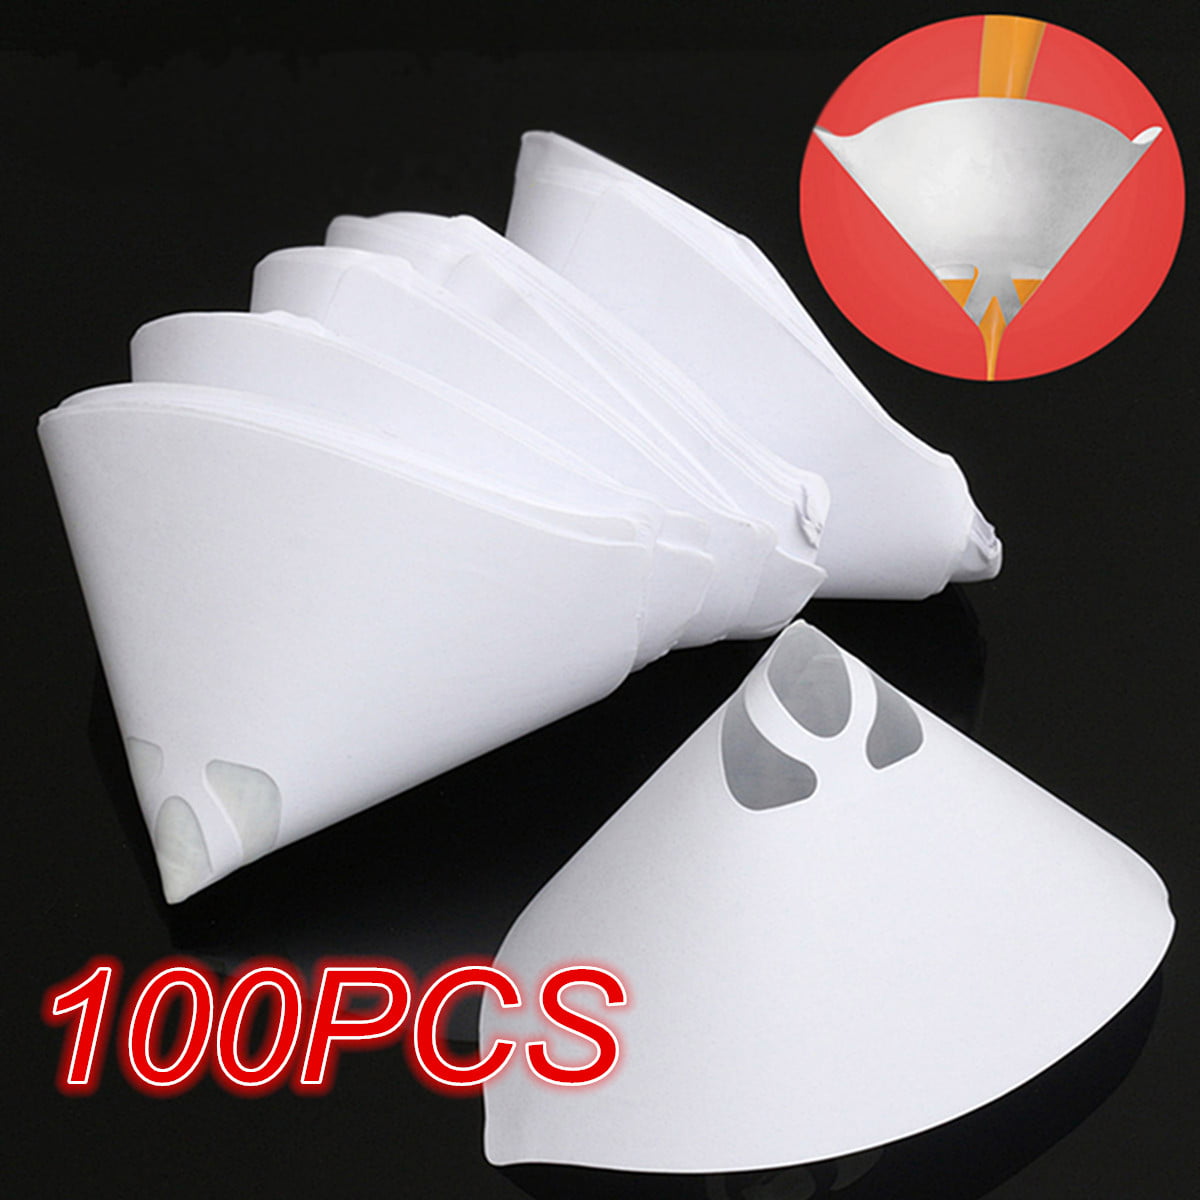 100 PAPER AND NYLON MESH FINE PAINT STRAINER FILTER CONES STRAINING